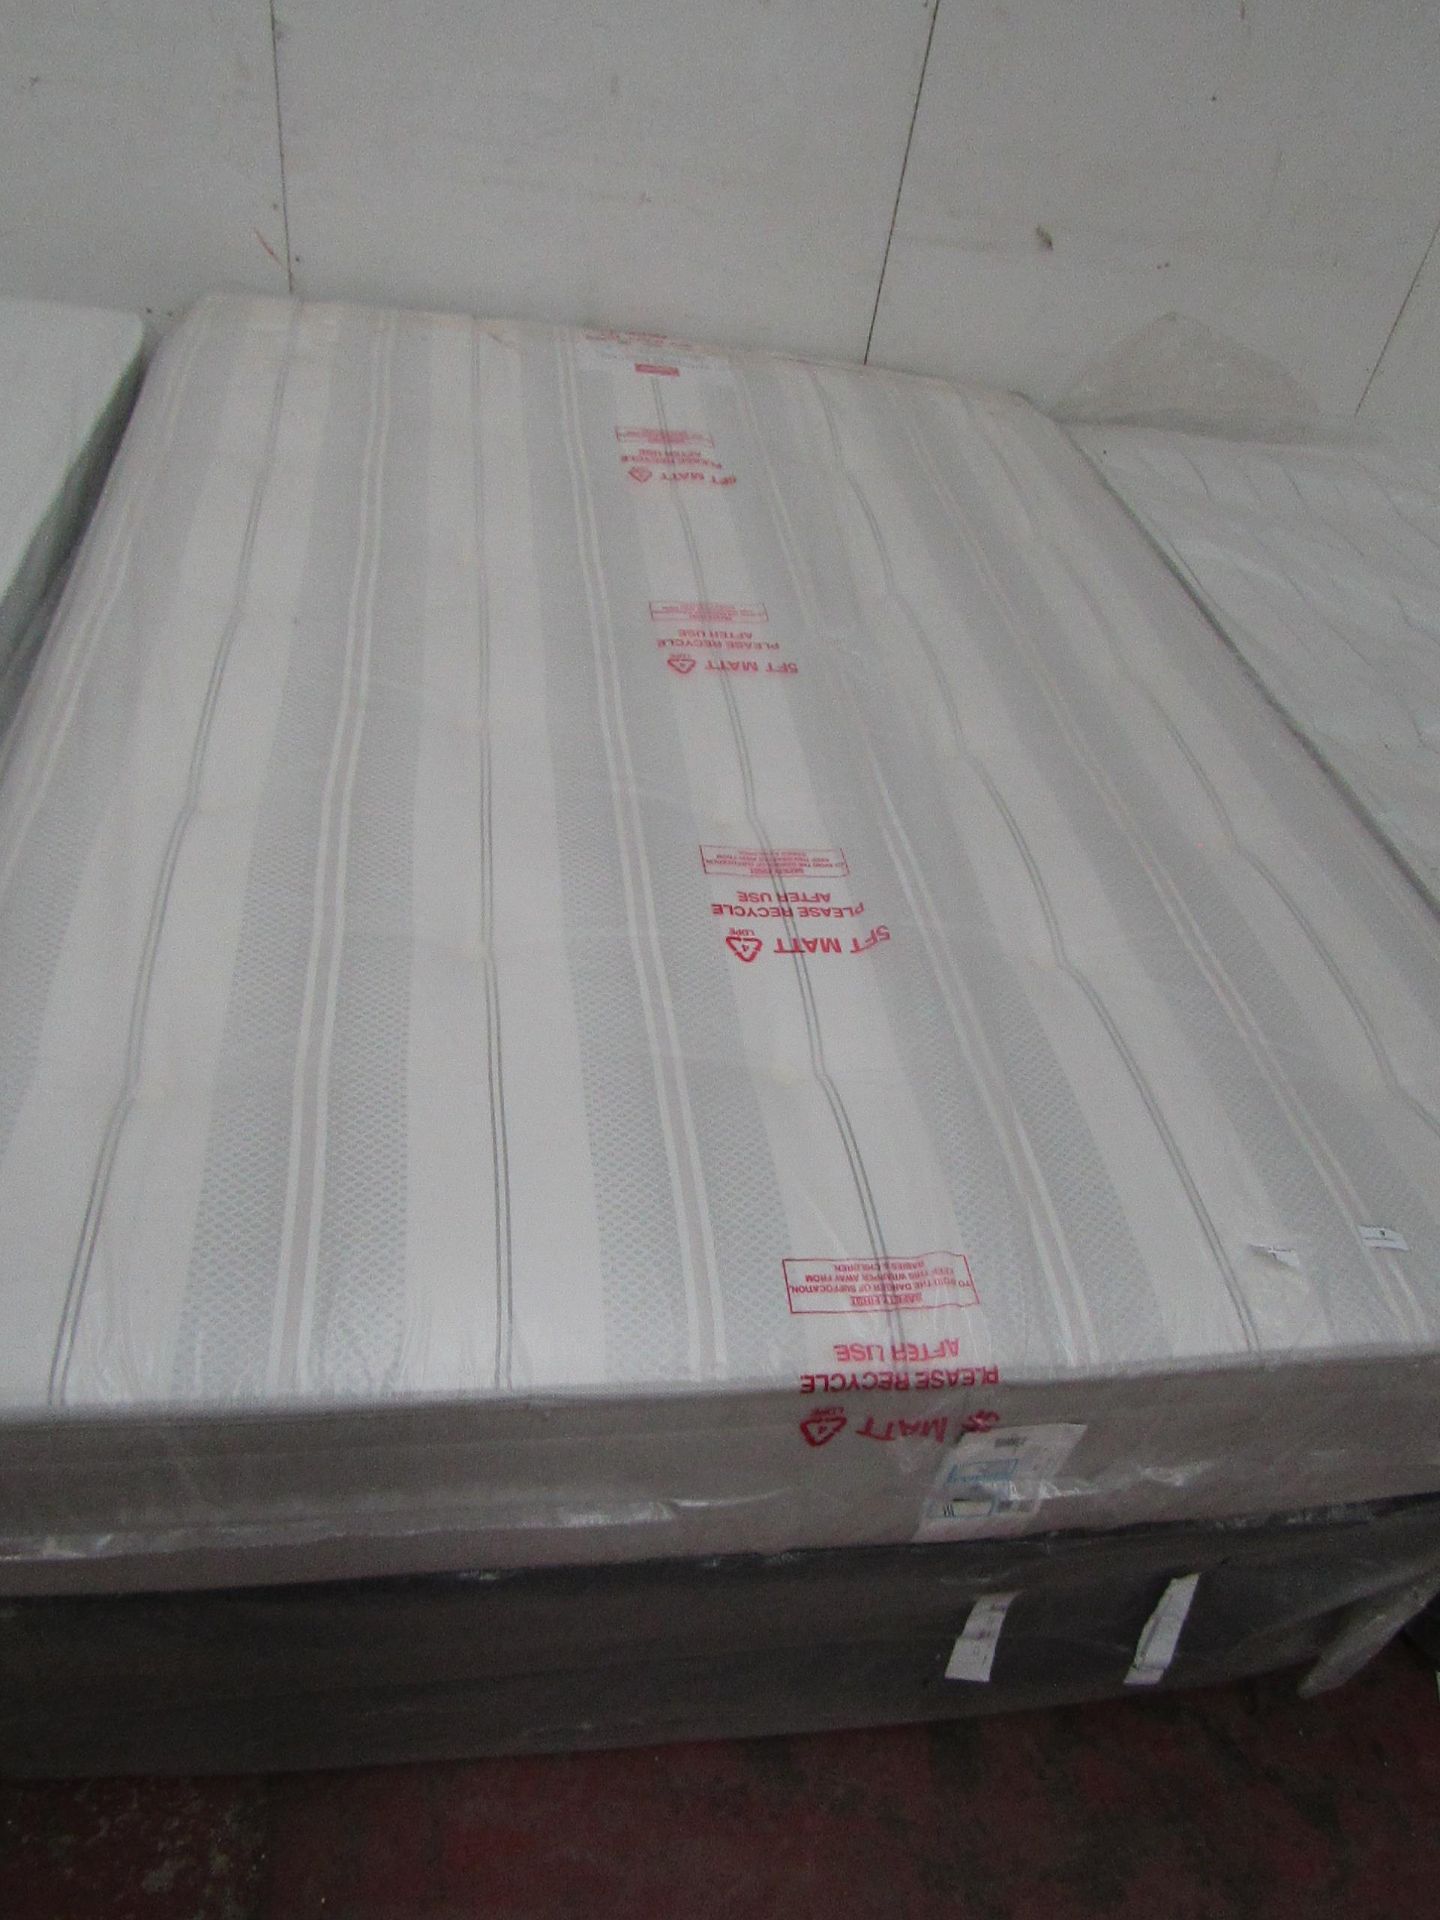 Vancouver kingsize mattress with divan base, ex-display so item may contain a few marks etc.